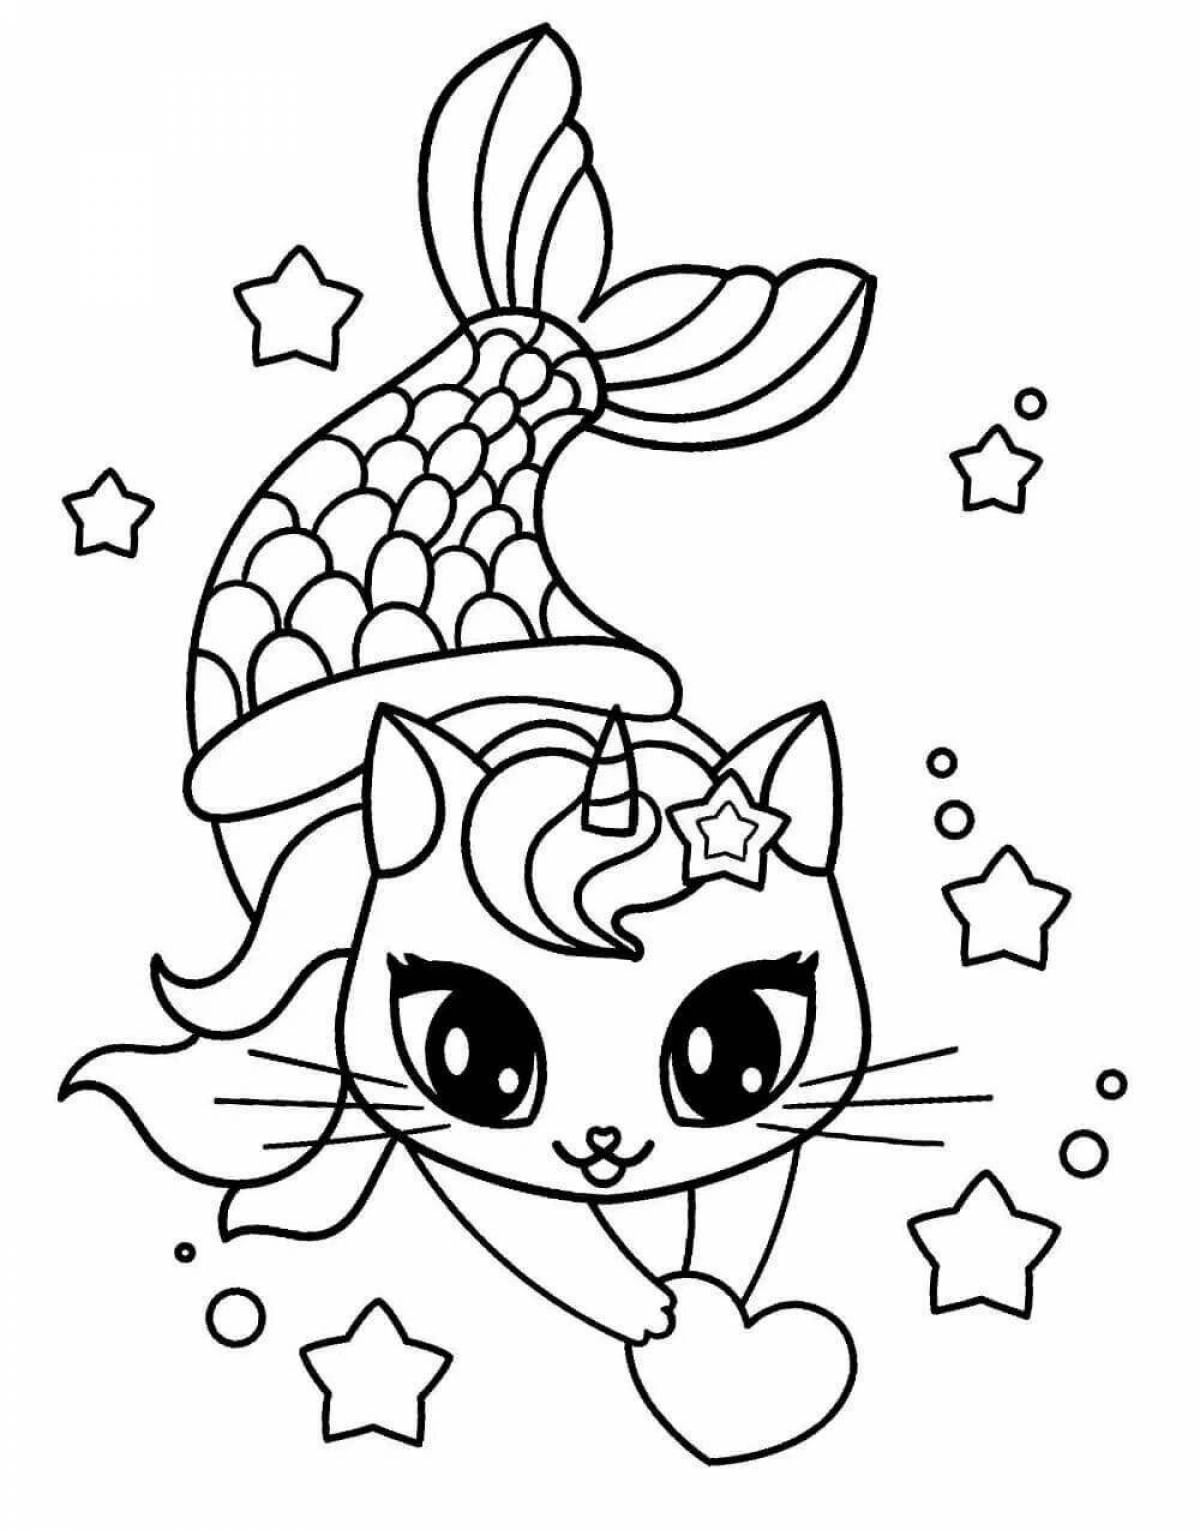 Unicorn pussy awesome coloring book